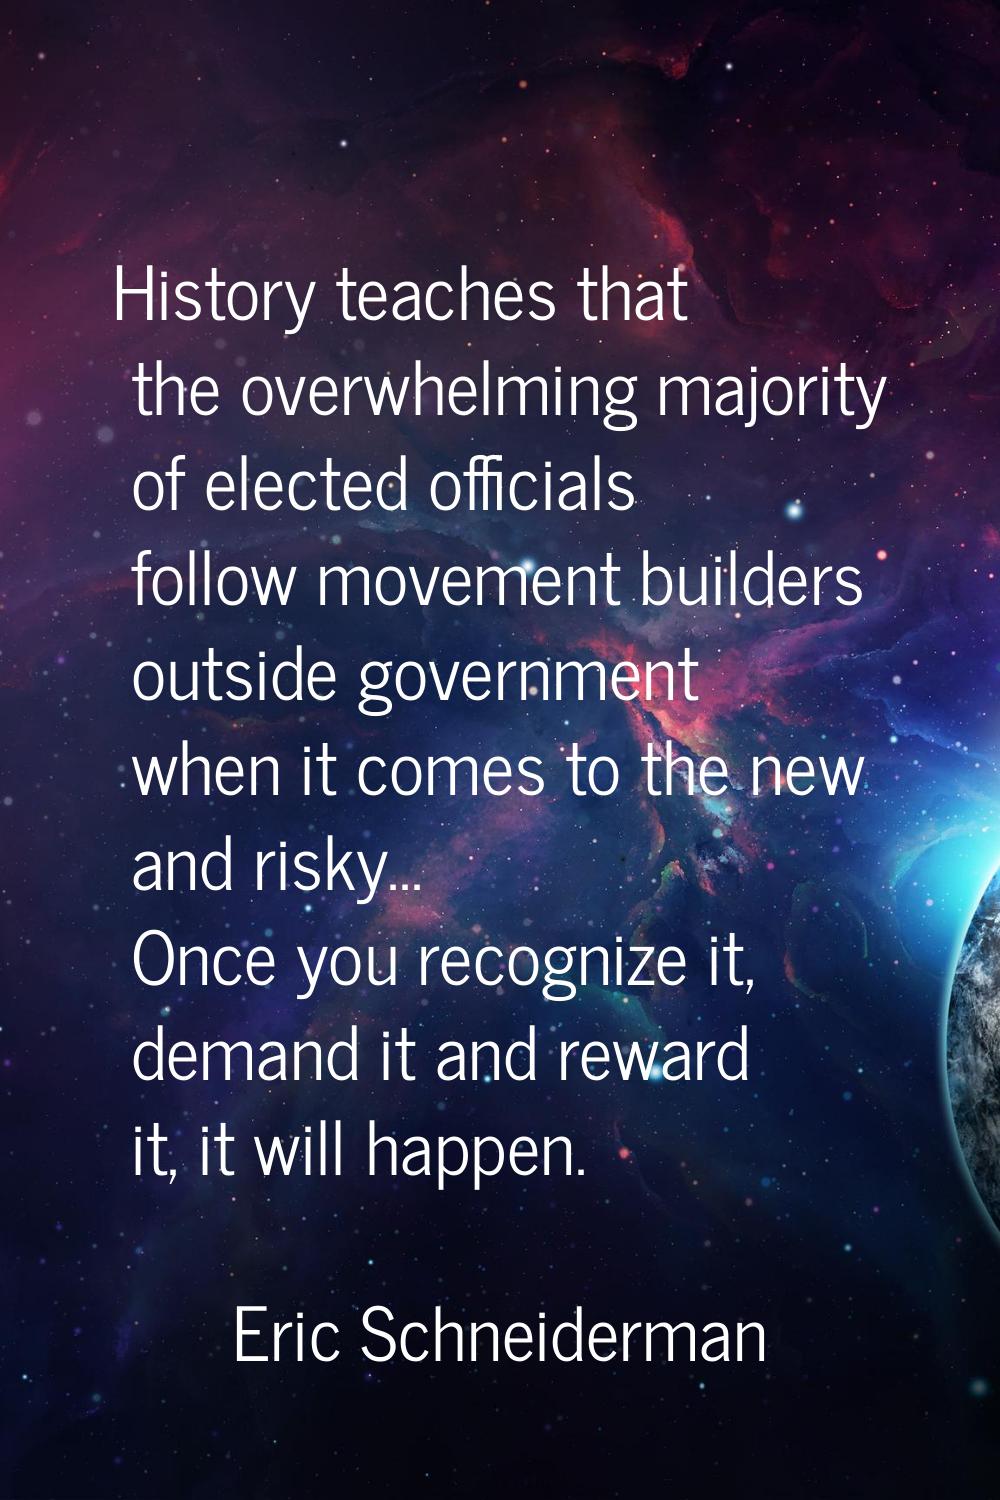 History teaches that the overwhelming majority of elected officials follow movement builders outsid